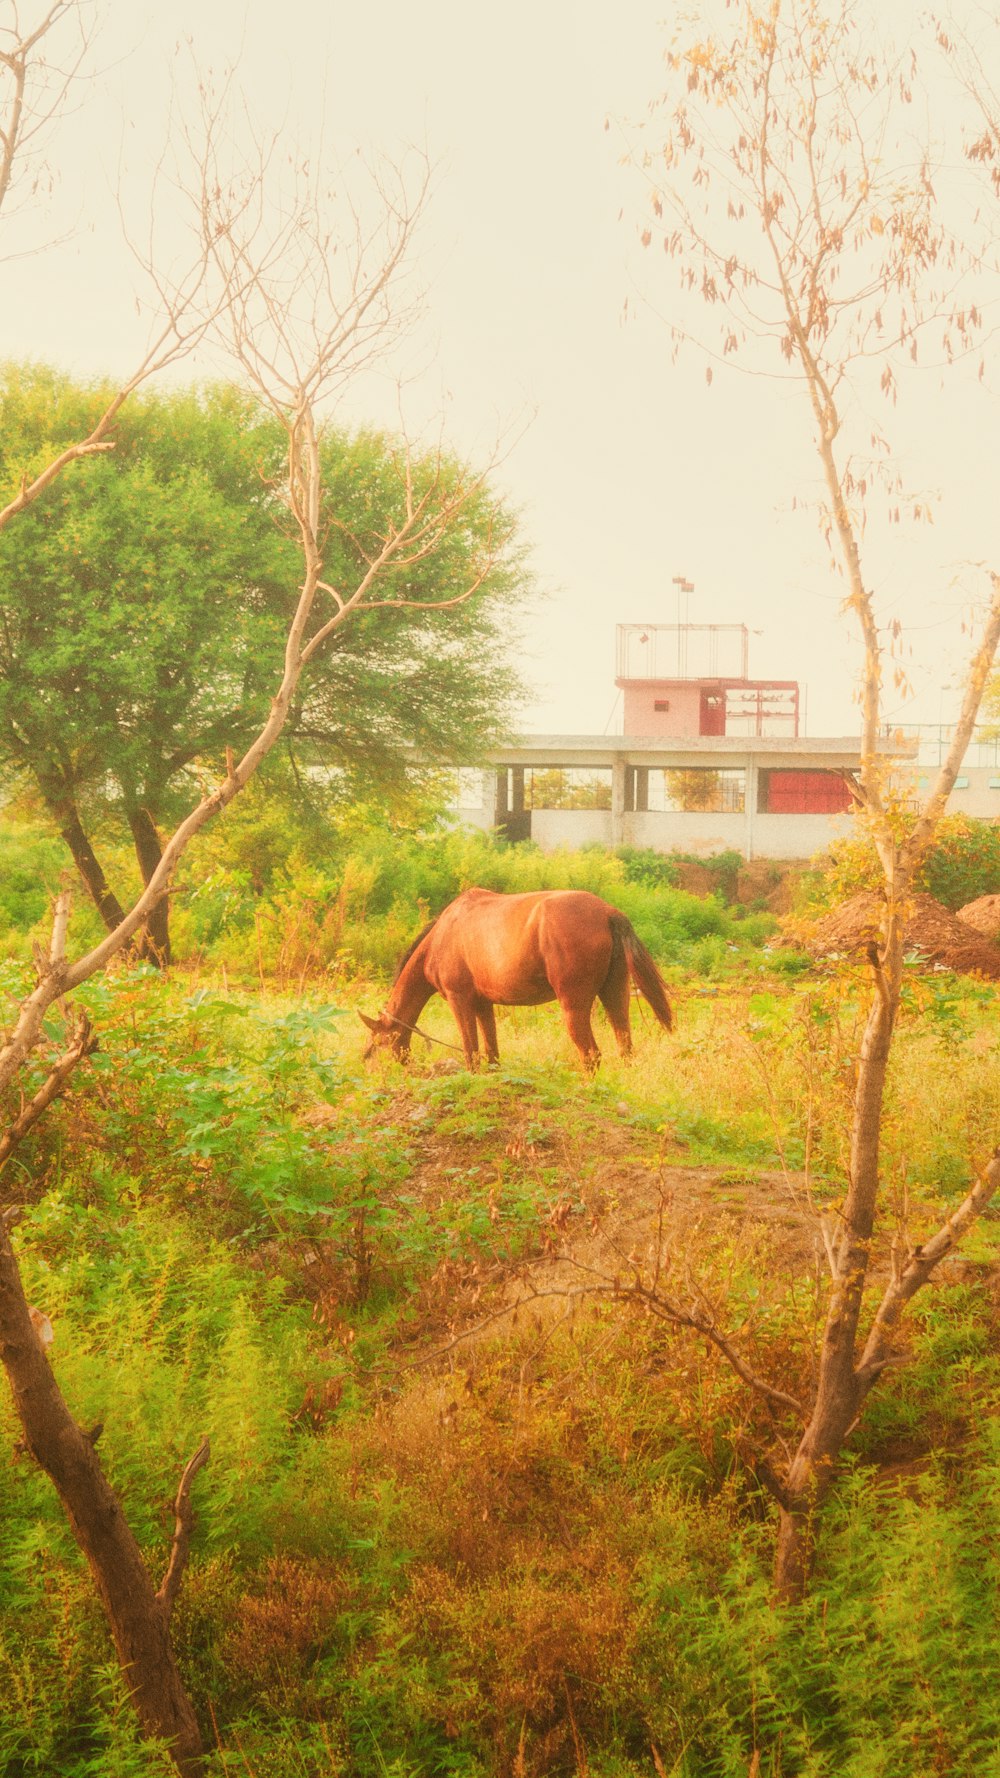 a brown elephant in a field